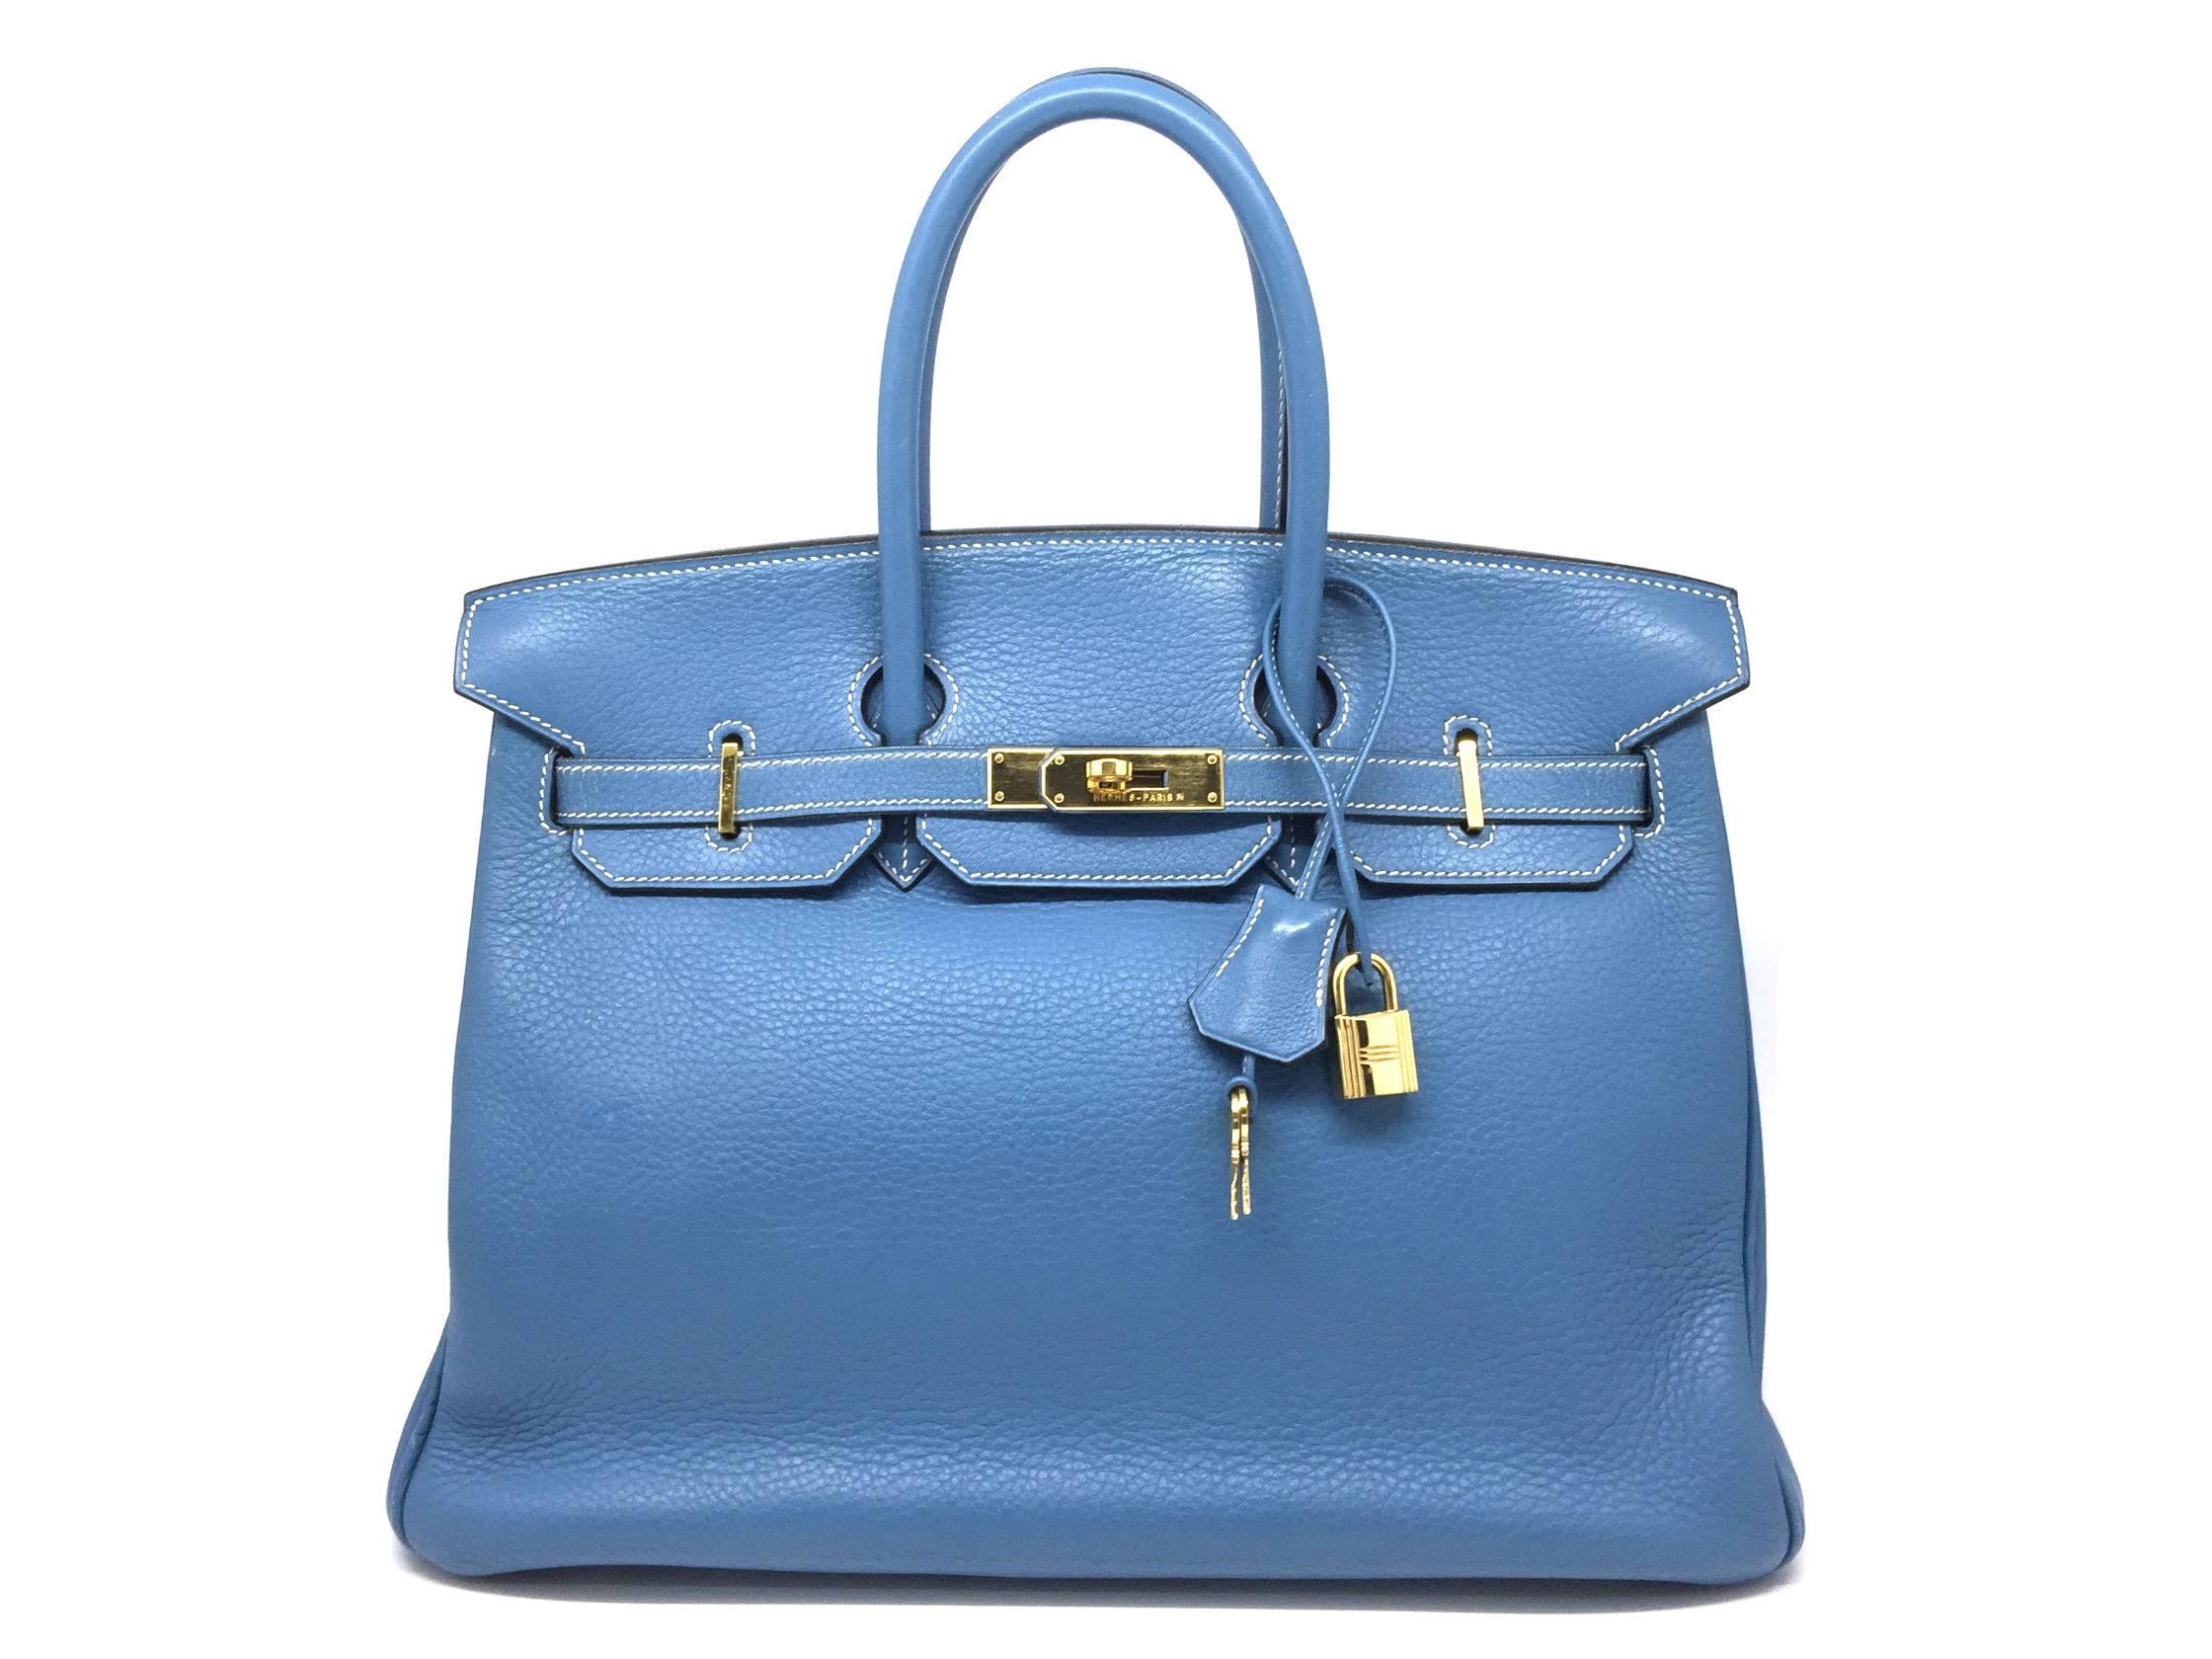 Color: Blue Aztec (designer color)
Material: Clemence Leather

Condition:
Rank A
Overall: Good, few minor defects
Surface: Minor Scratches
Corners: Minor Scratches & Stains
Edges: Minor Stains
Handles/Straps: Minor Scratches